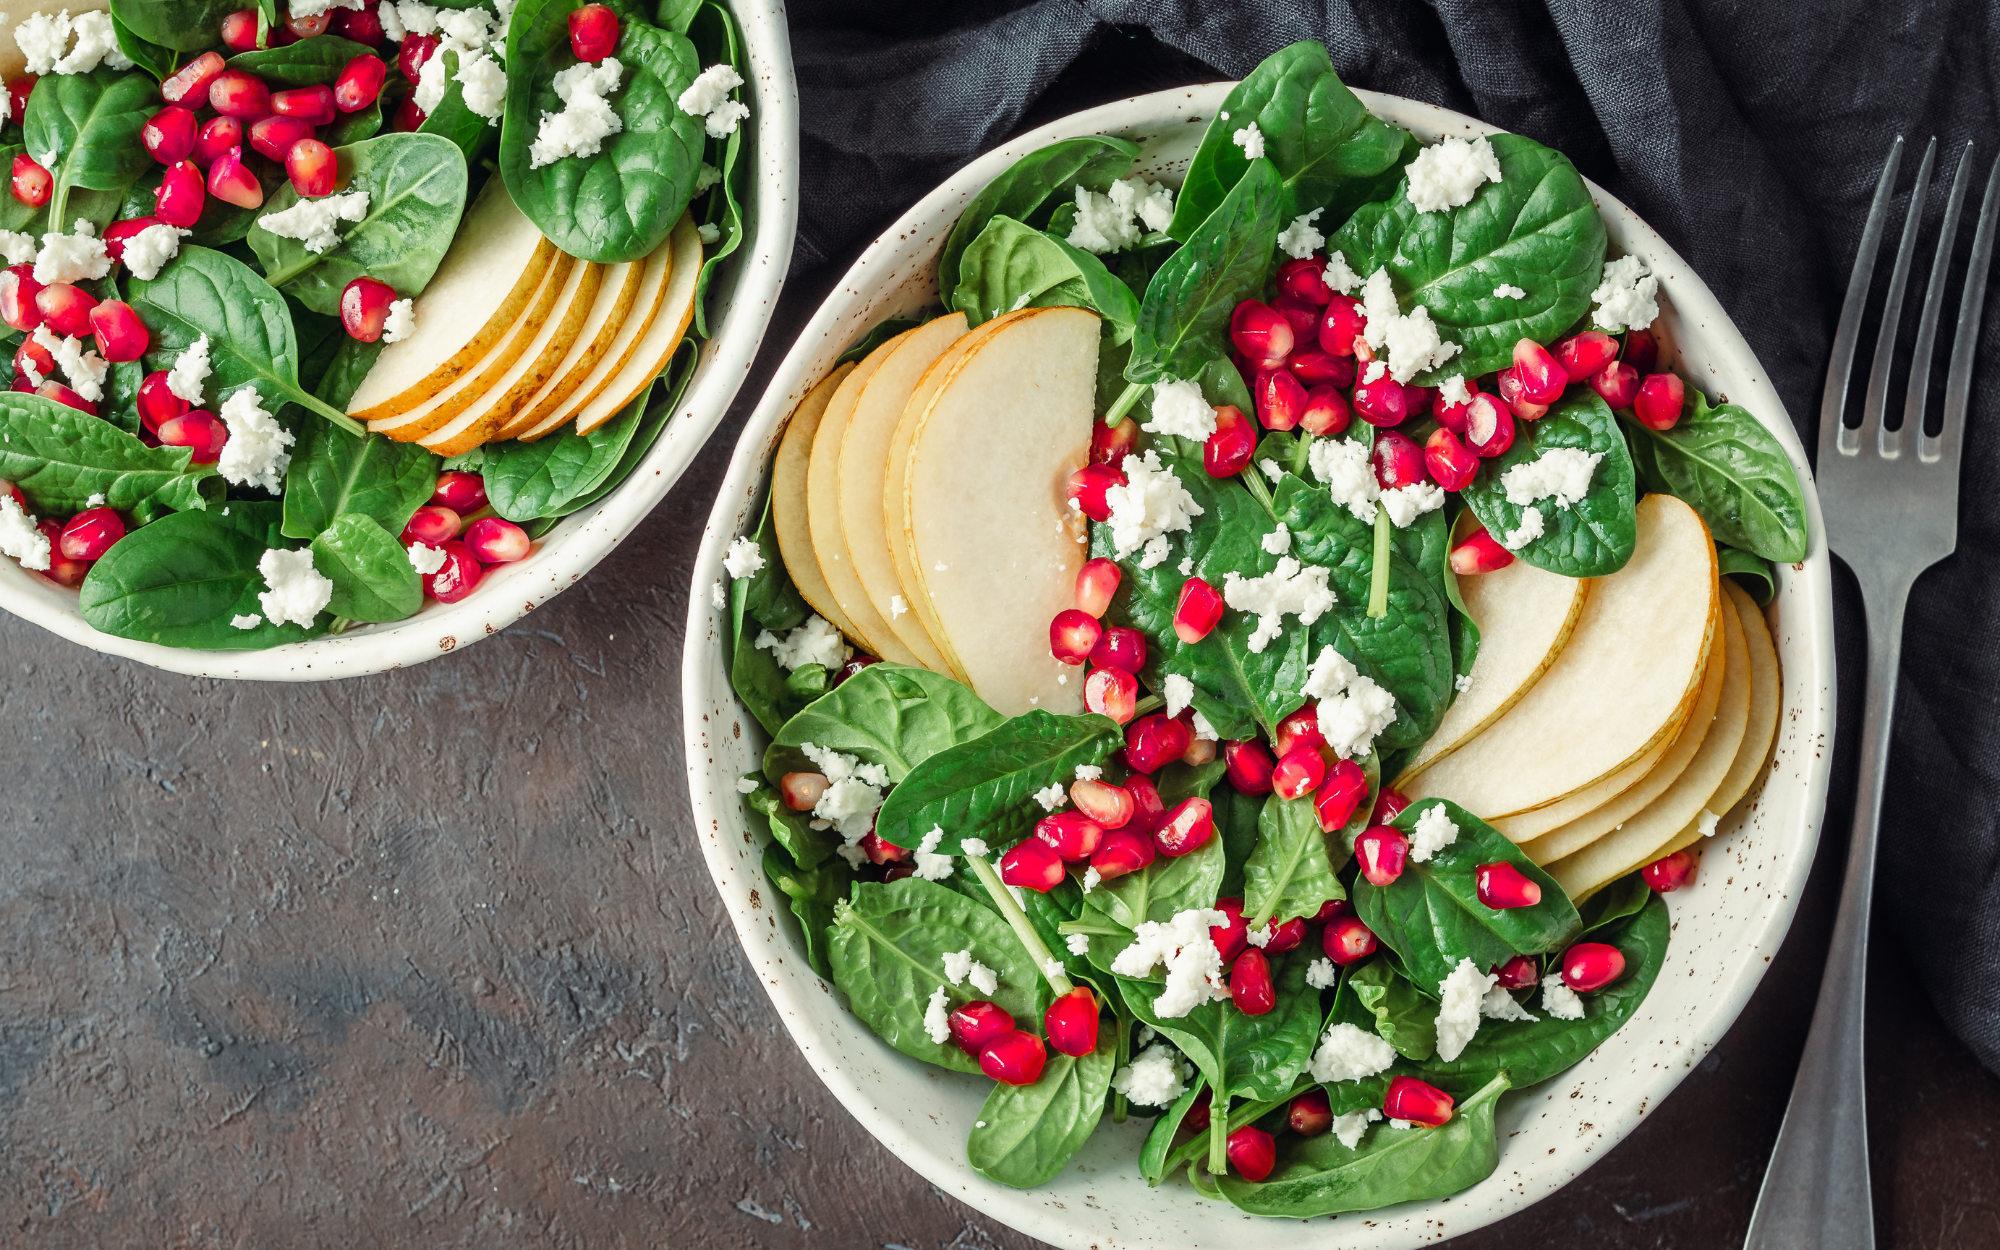 Pomegranate & Pear Salad with Ginger Dressing